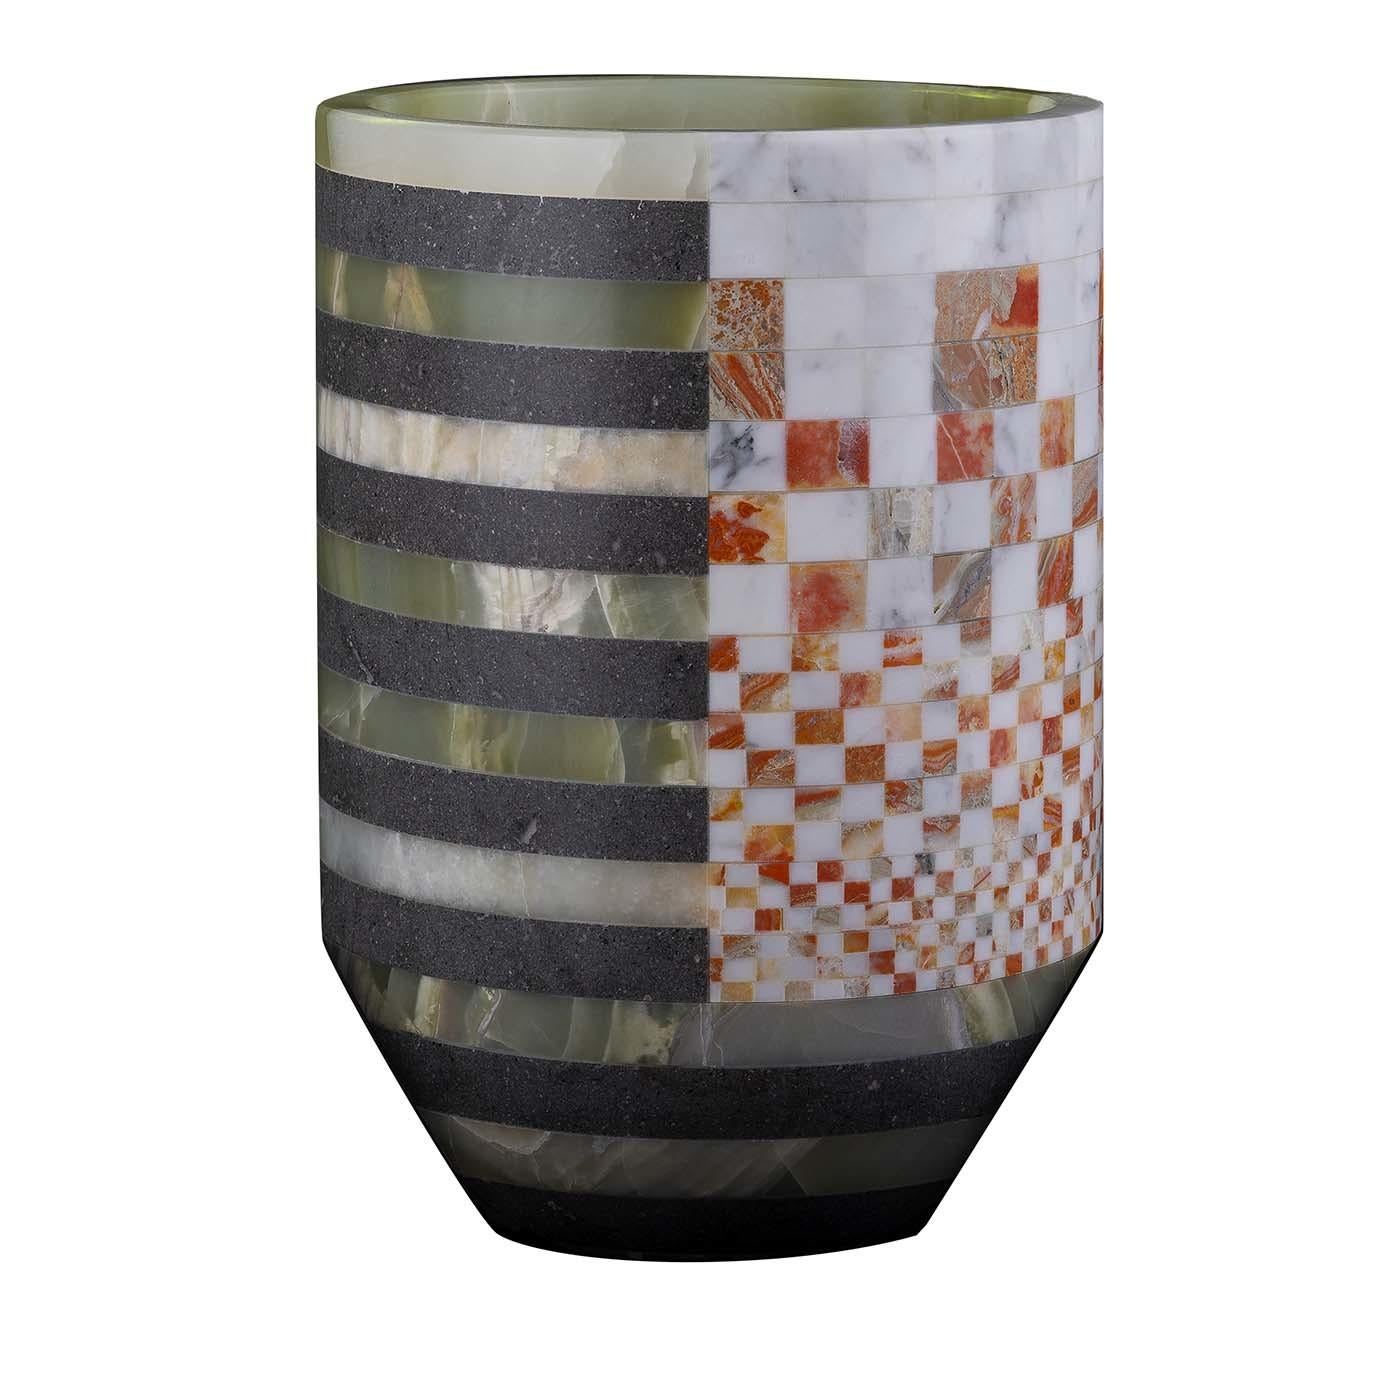 Combining carefully cut pieces of marble in a cylindrical shape with a tapered base, this exquisite vase showcases the range of colors, veining and natural features of white Carrara marble, rainbow onyx, basalt and green onyx in a geometric pattern